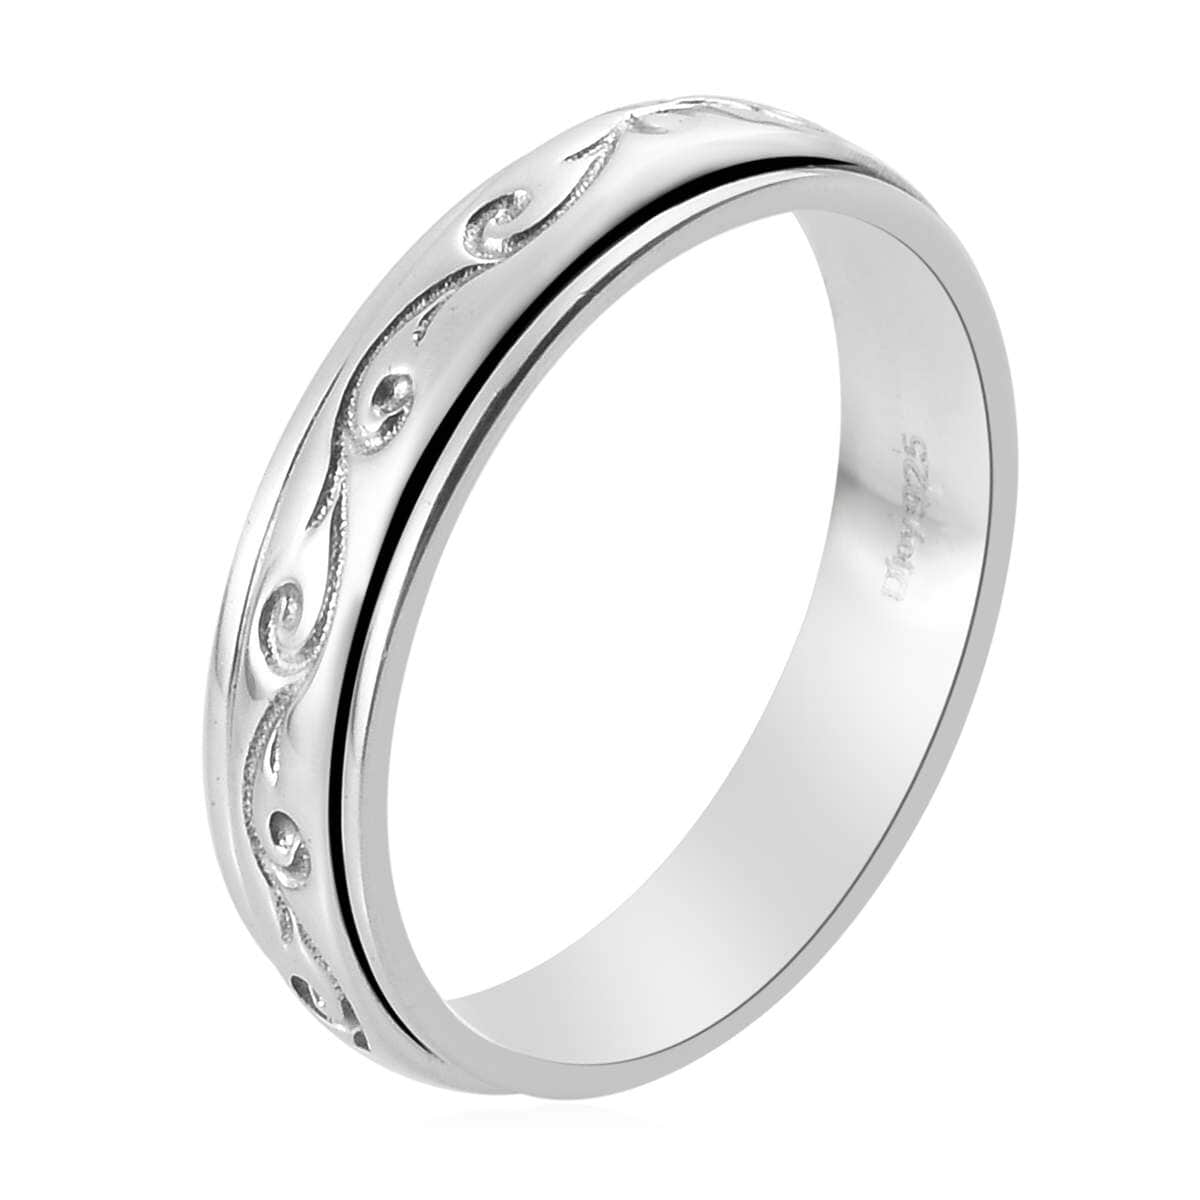 Vines Sterling Silver Spinner Ring, Anxiety Ring for Women, Fidget Rings for Anxiety, Stress Relieving Anxiety Ring (Size 5.0) image number 5